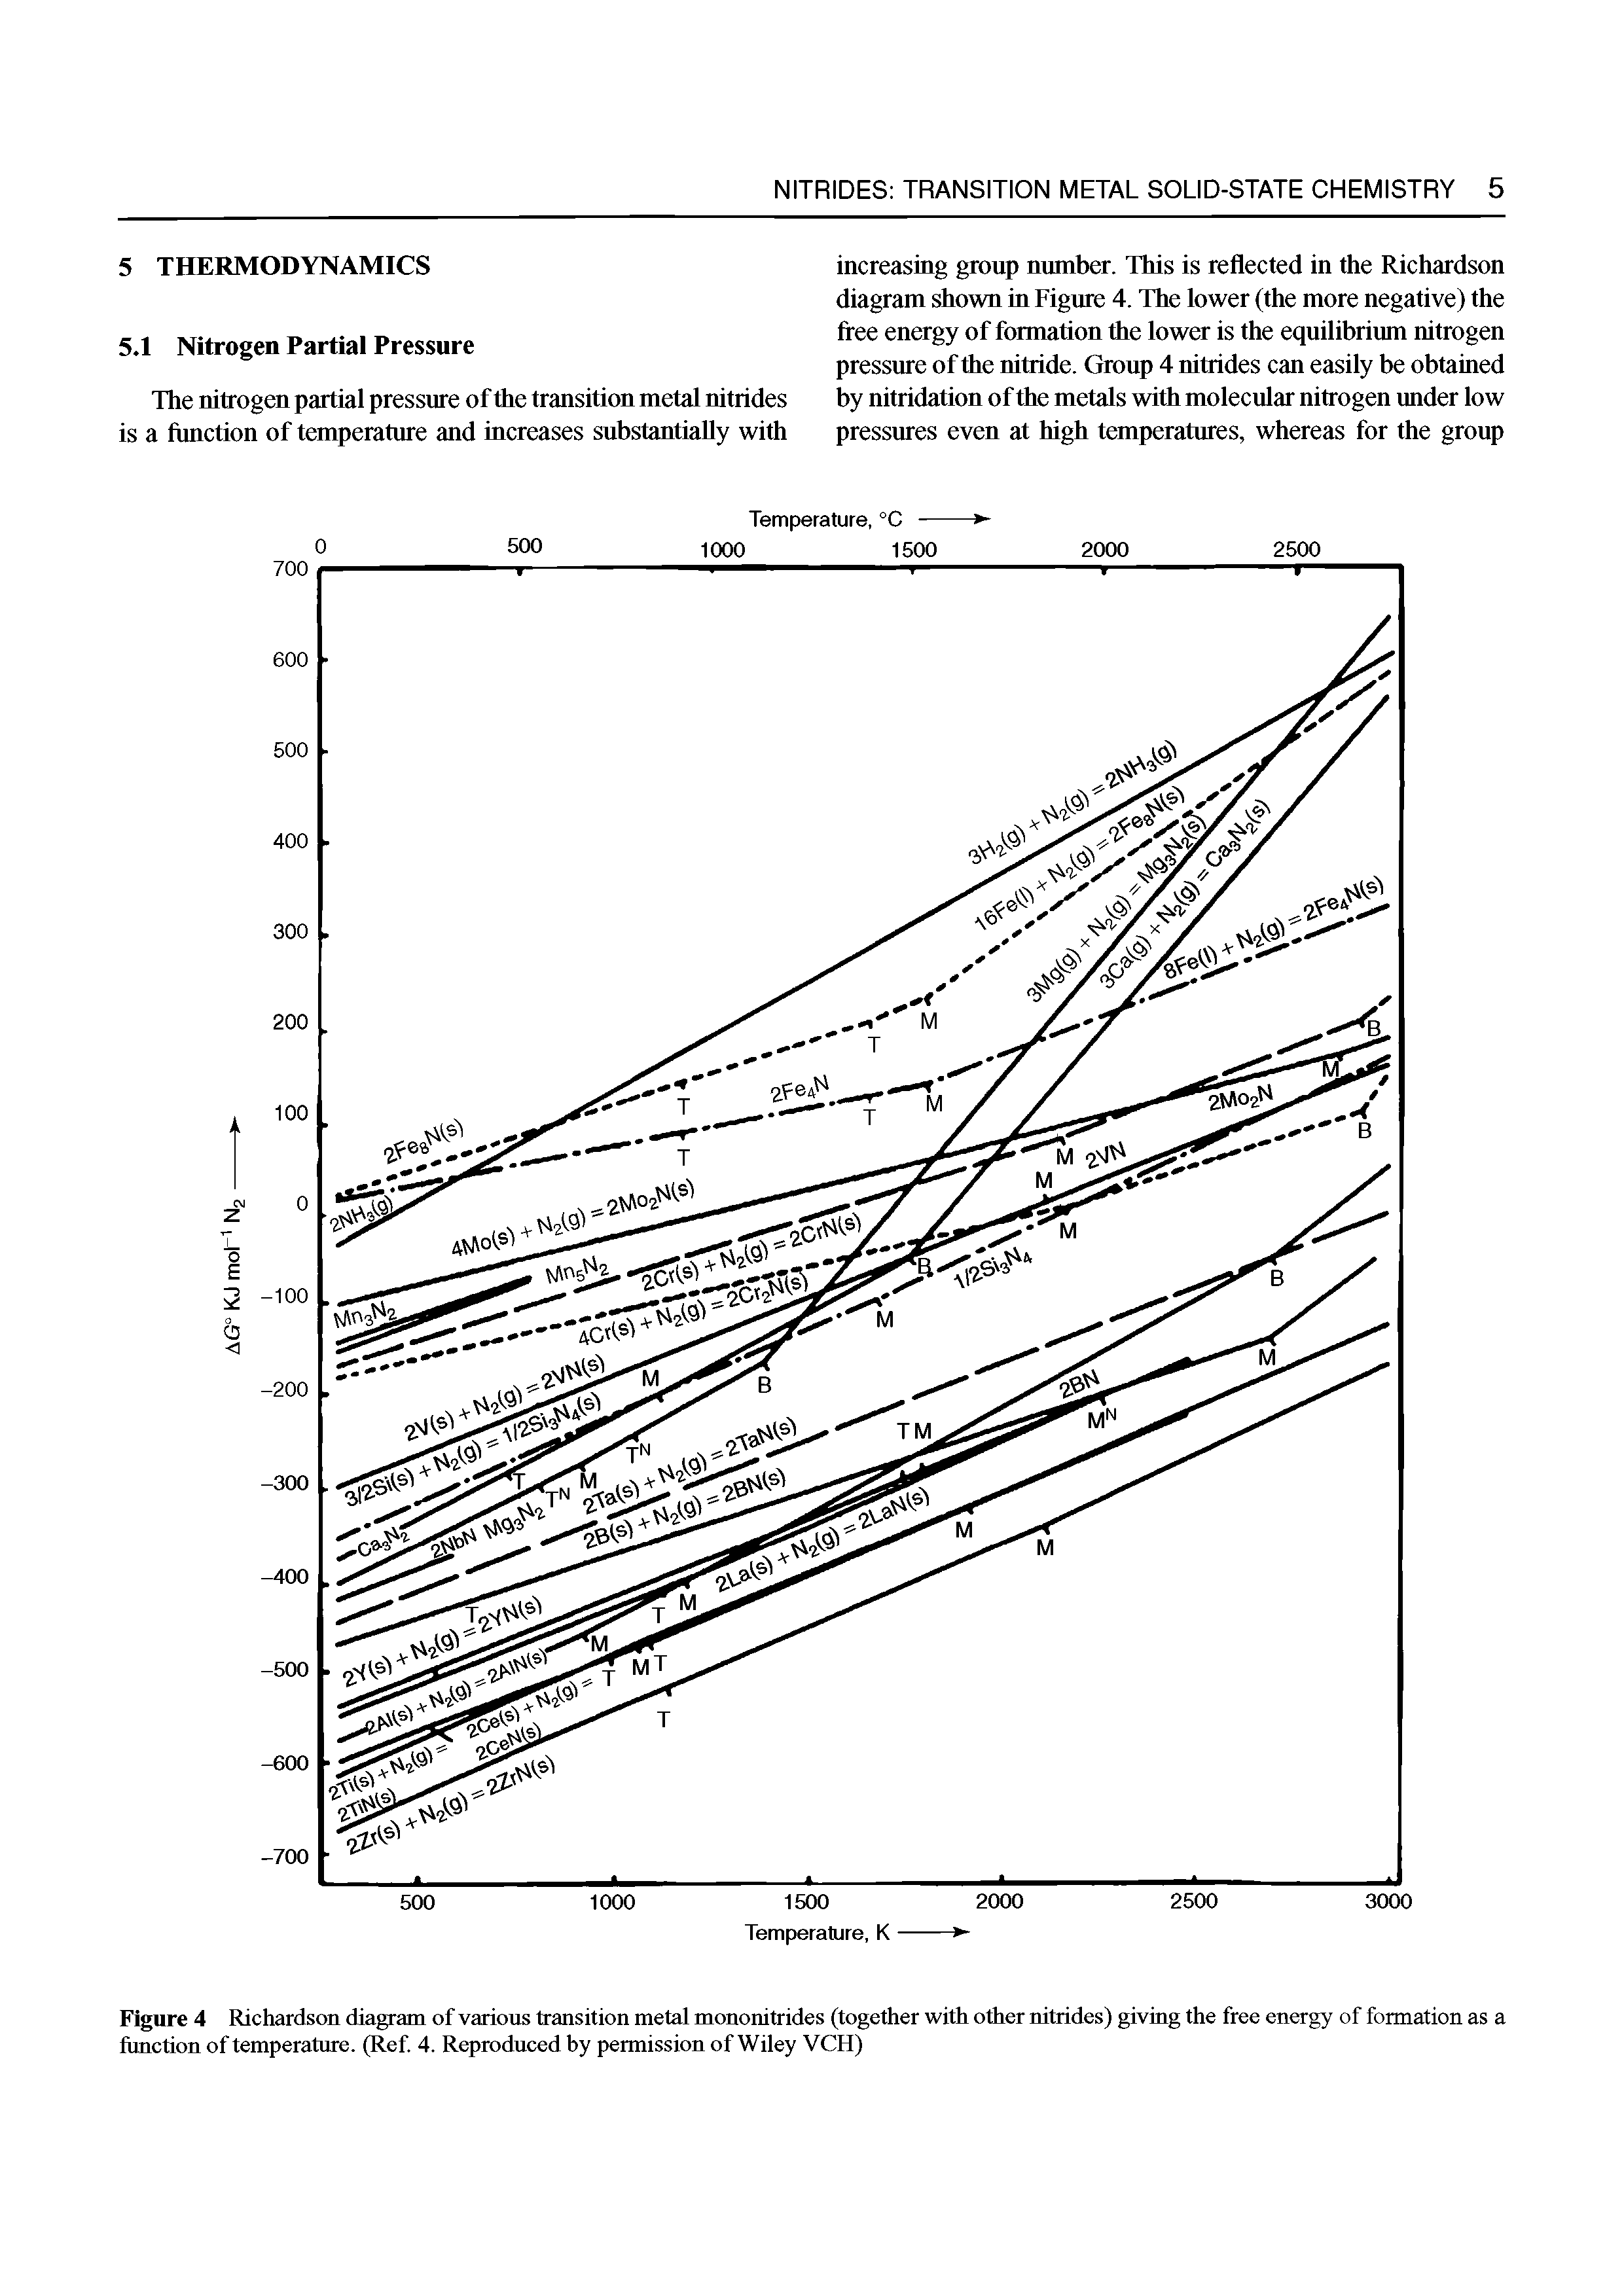 Figure 4 Richardson diagram of various transition metal mononitrides (together with other nitrides) giving the free energy of formation as a function of temperature. (Ref 4. Reproduced by permission of Wiley VCH)...